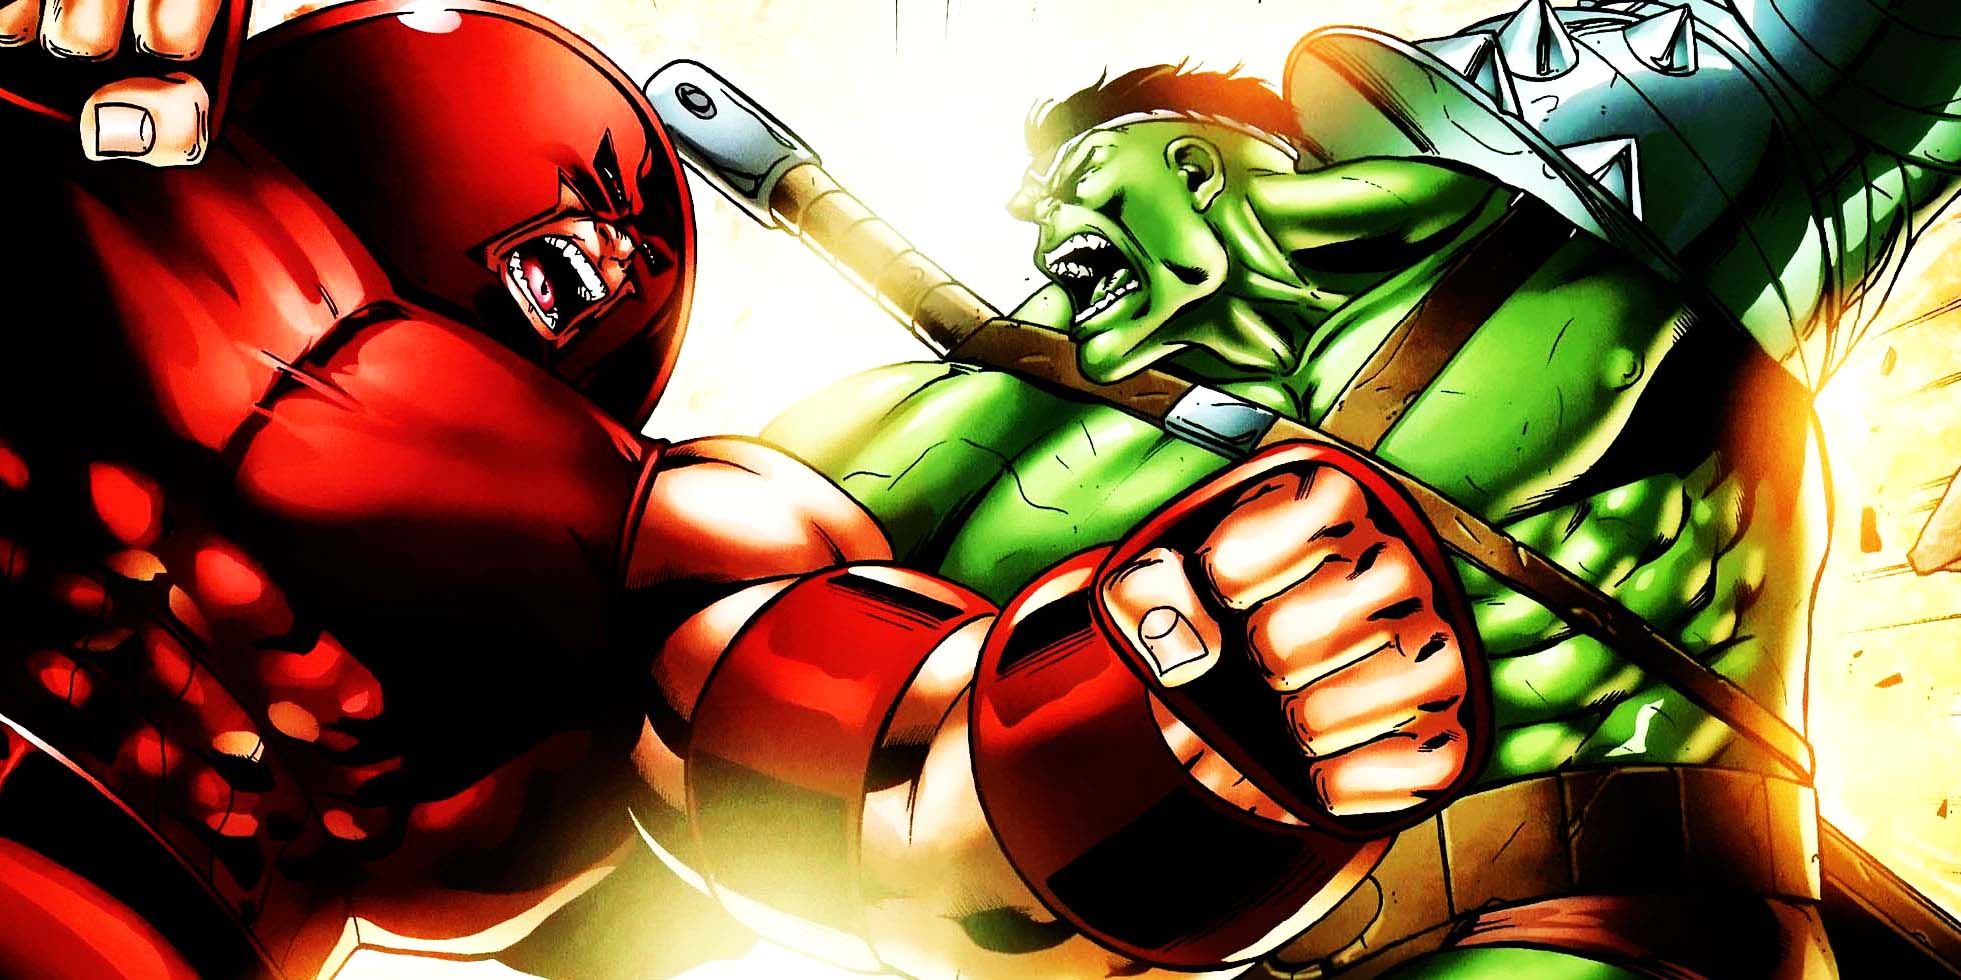 Juggernaut and The Hulk raise their fists to strike each other